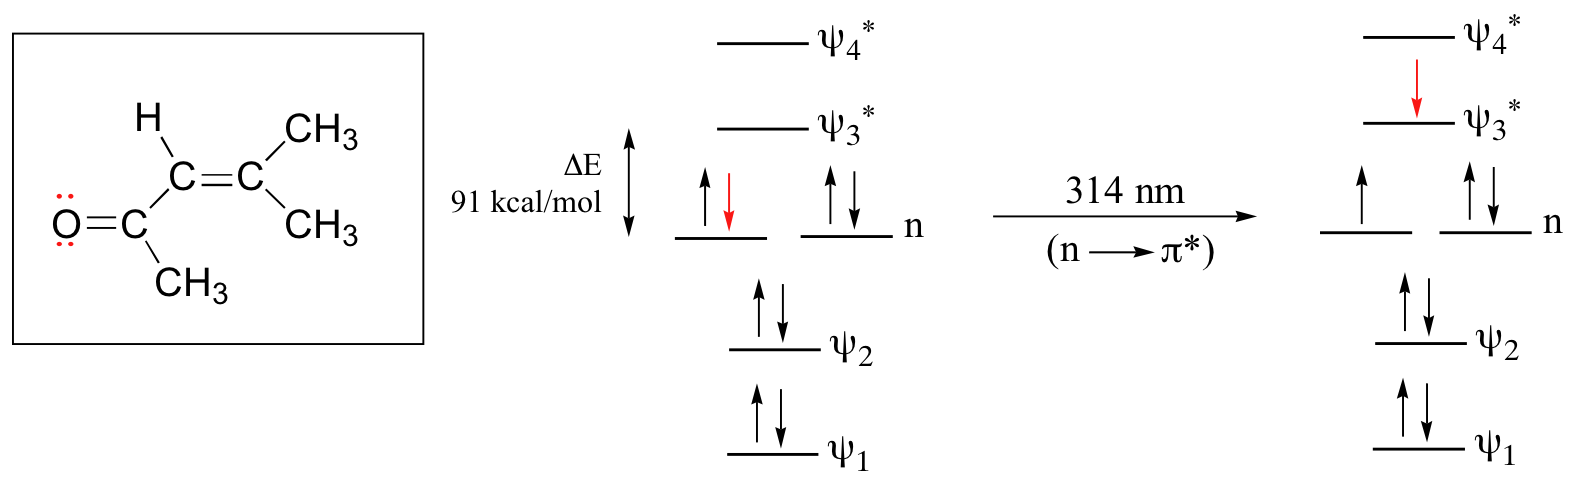 Molecular orbital diagram for 4-methyl-3-penten-2-one. Two bonding orbitals and two antibonding orbitals with one n level between them. 4 electrons in the bonding level and 4 electrons at the n level. 91 k cal per mol between n and antibonding levels. 314 nanometers causes one electron to transition from n to antibonding orbital.